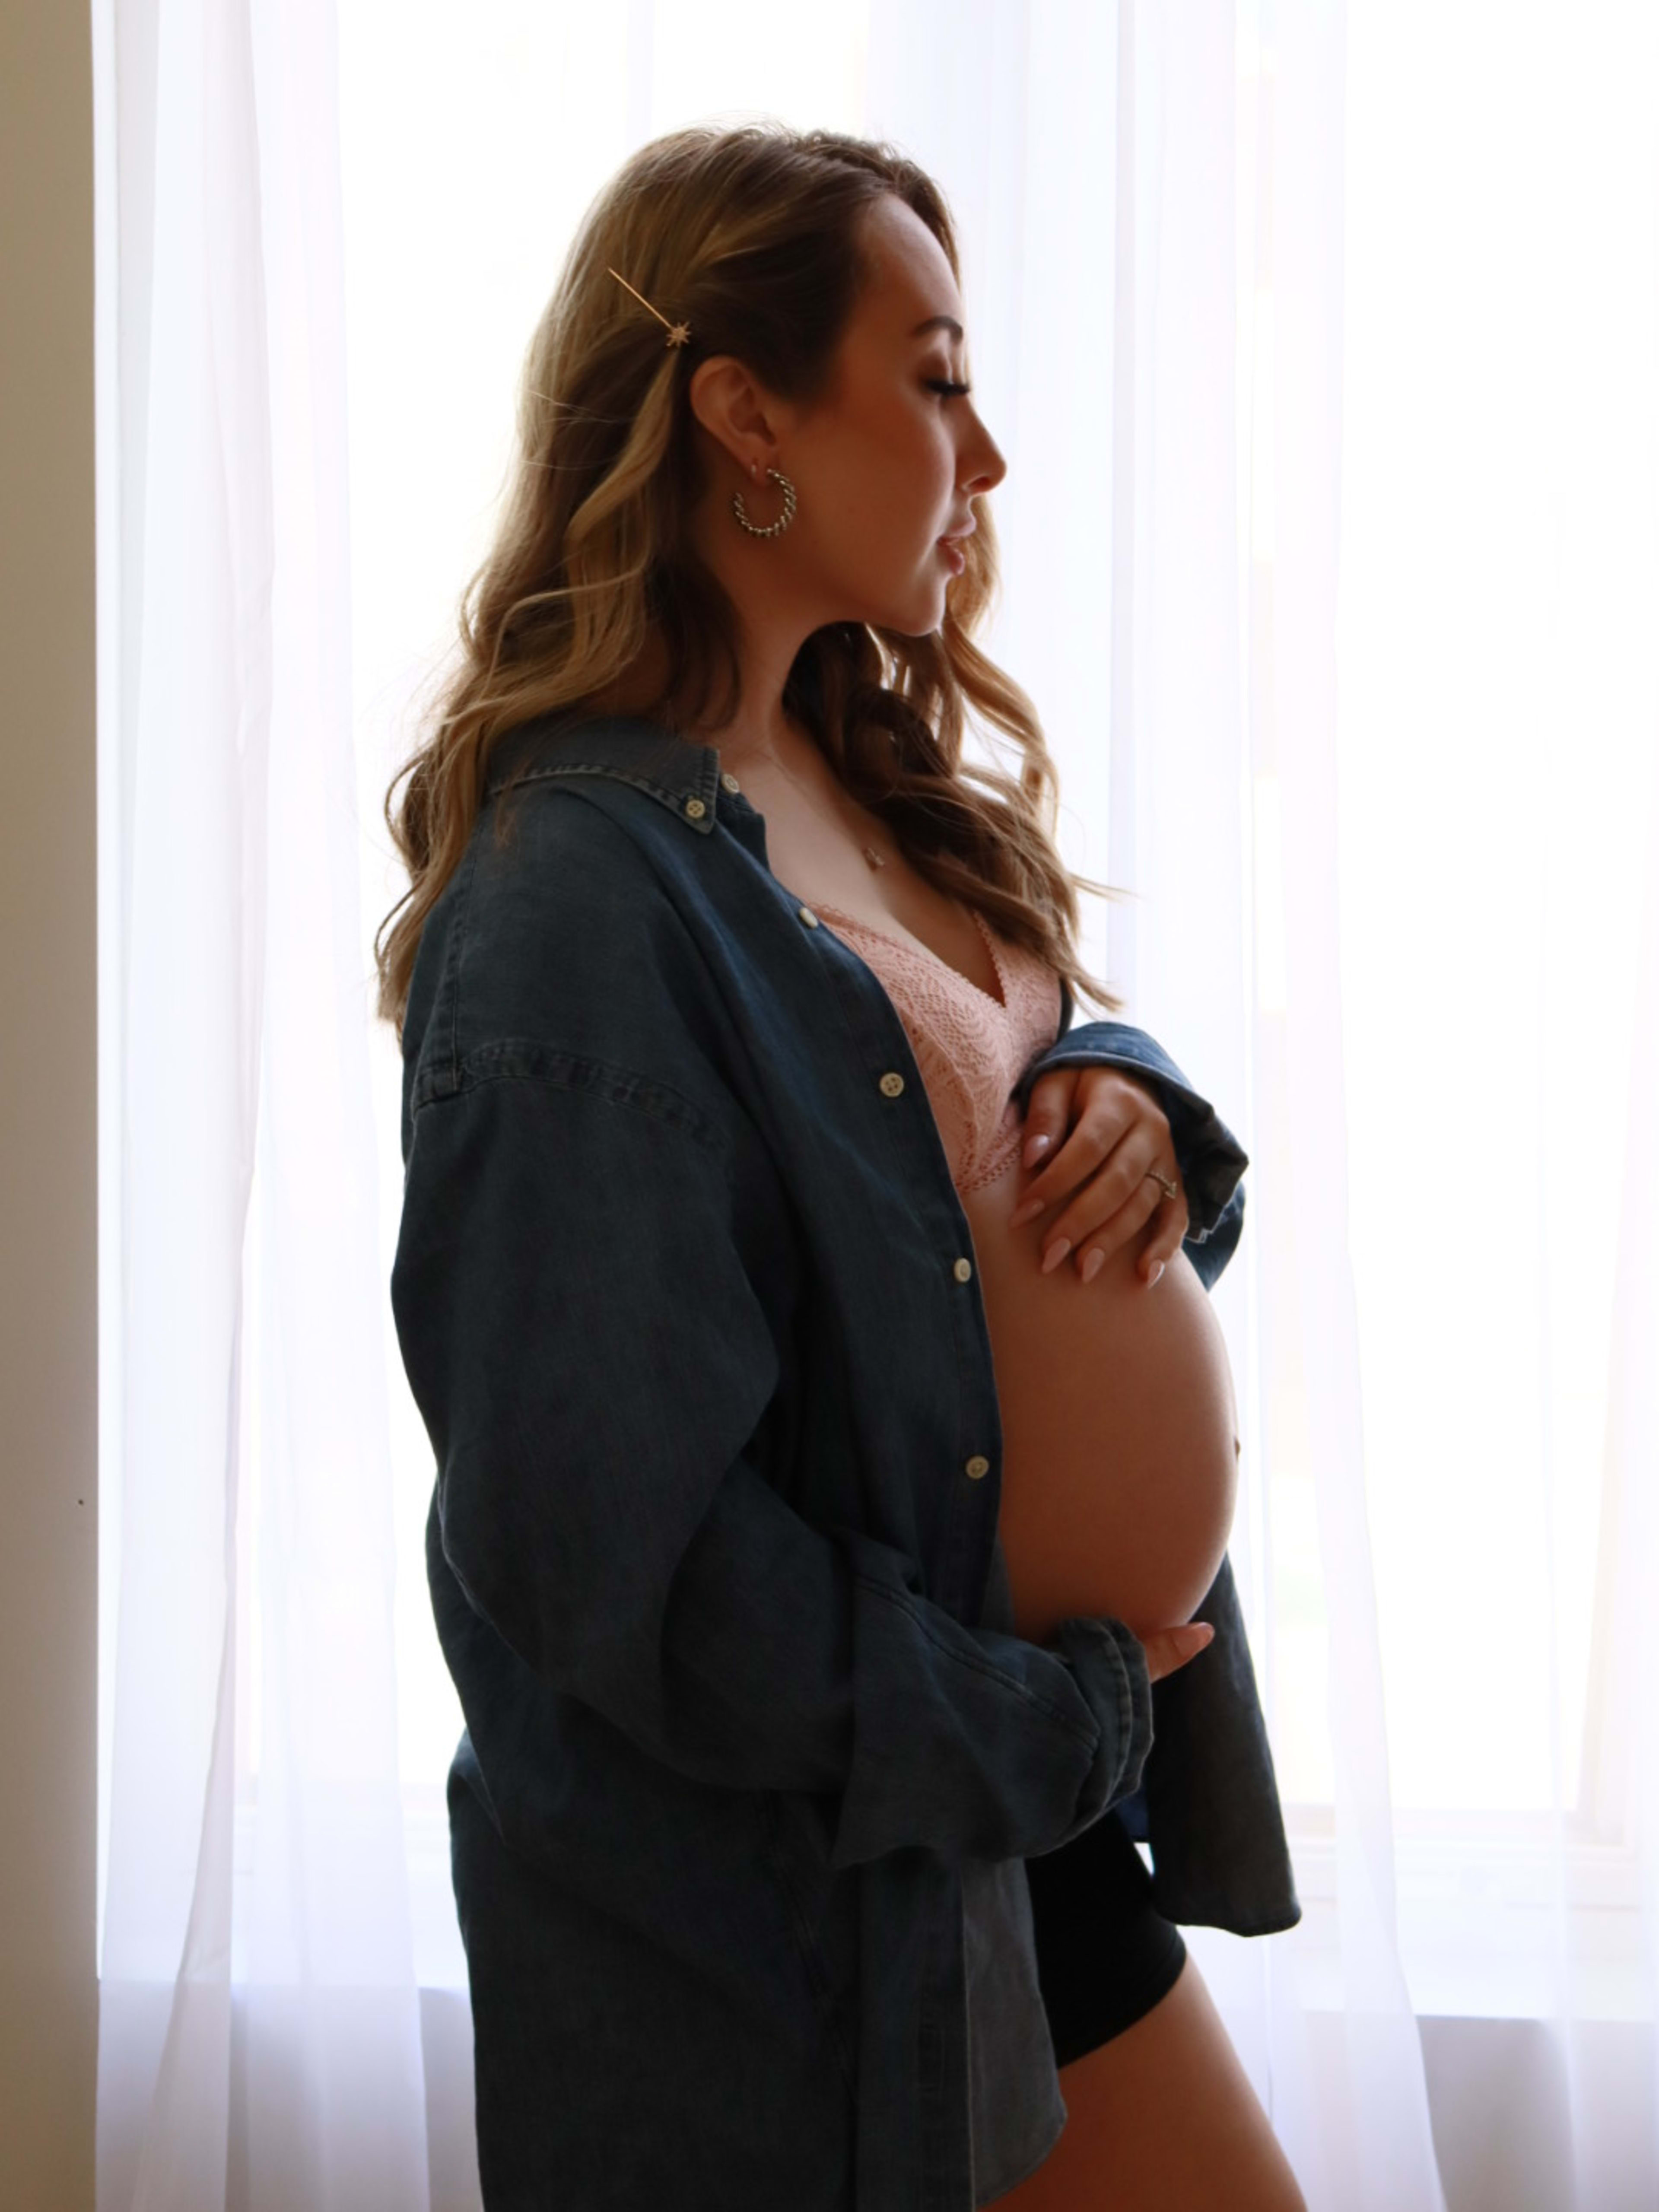 A pregnant woman peacefully standing by the window.